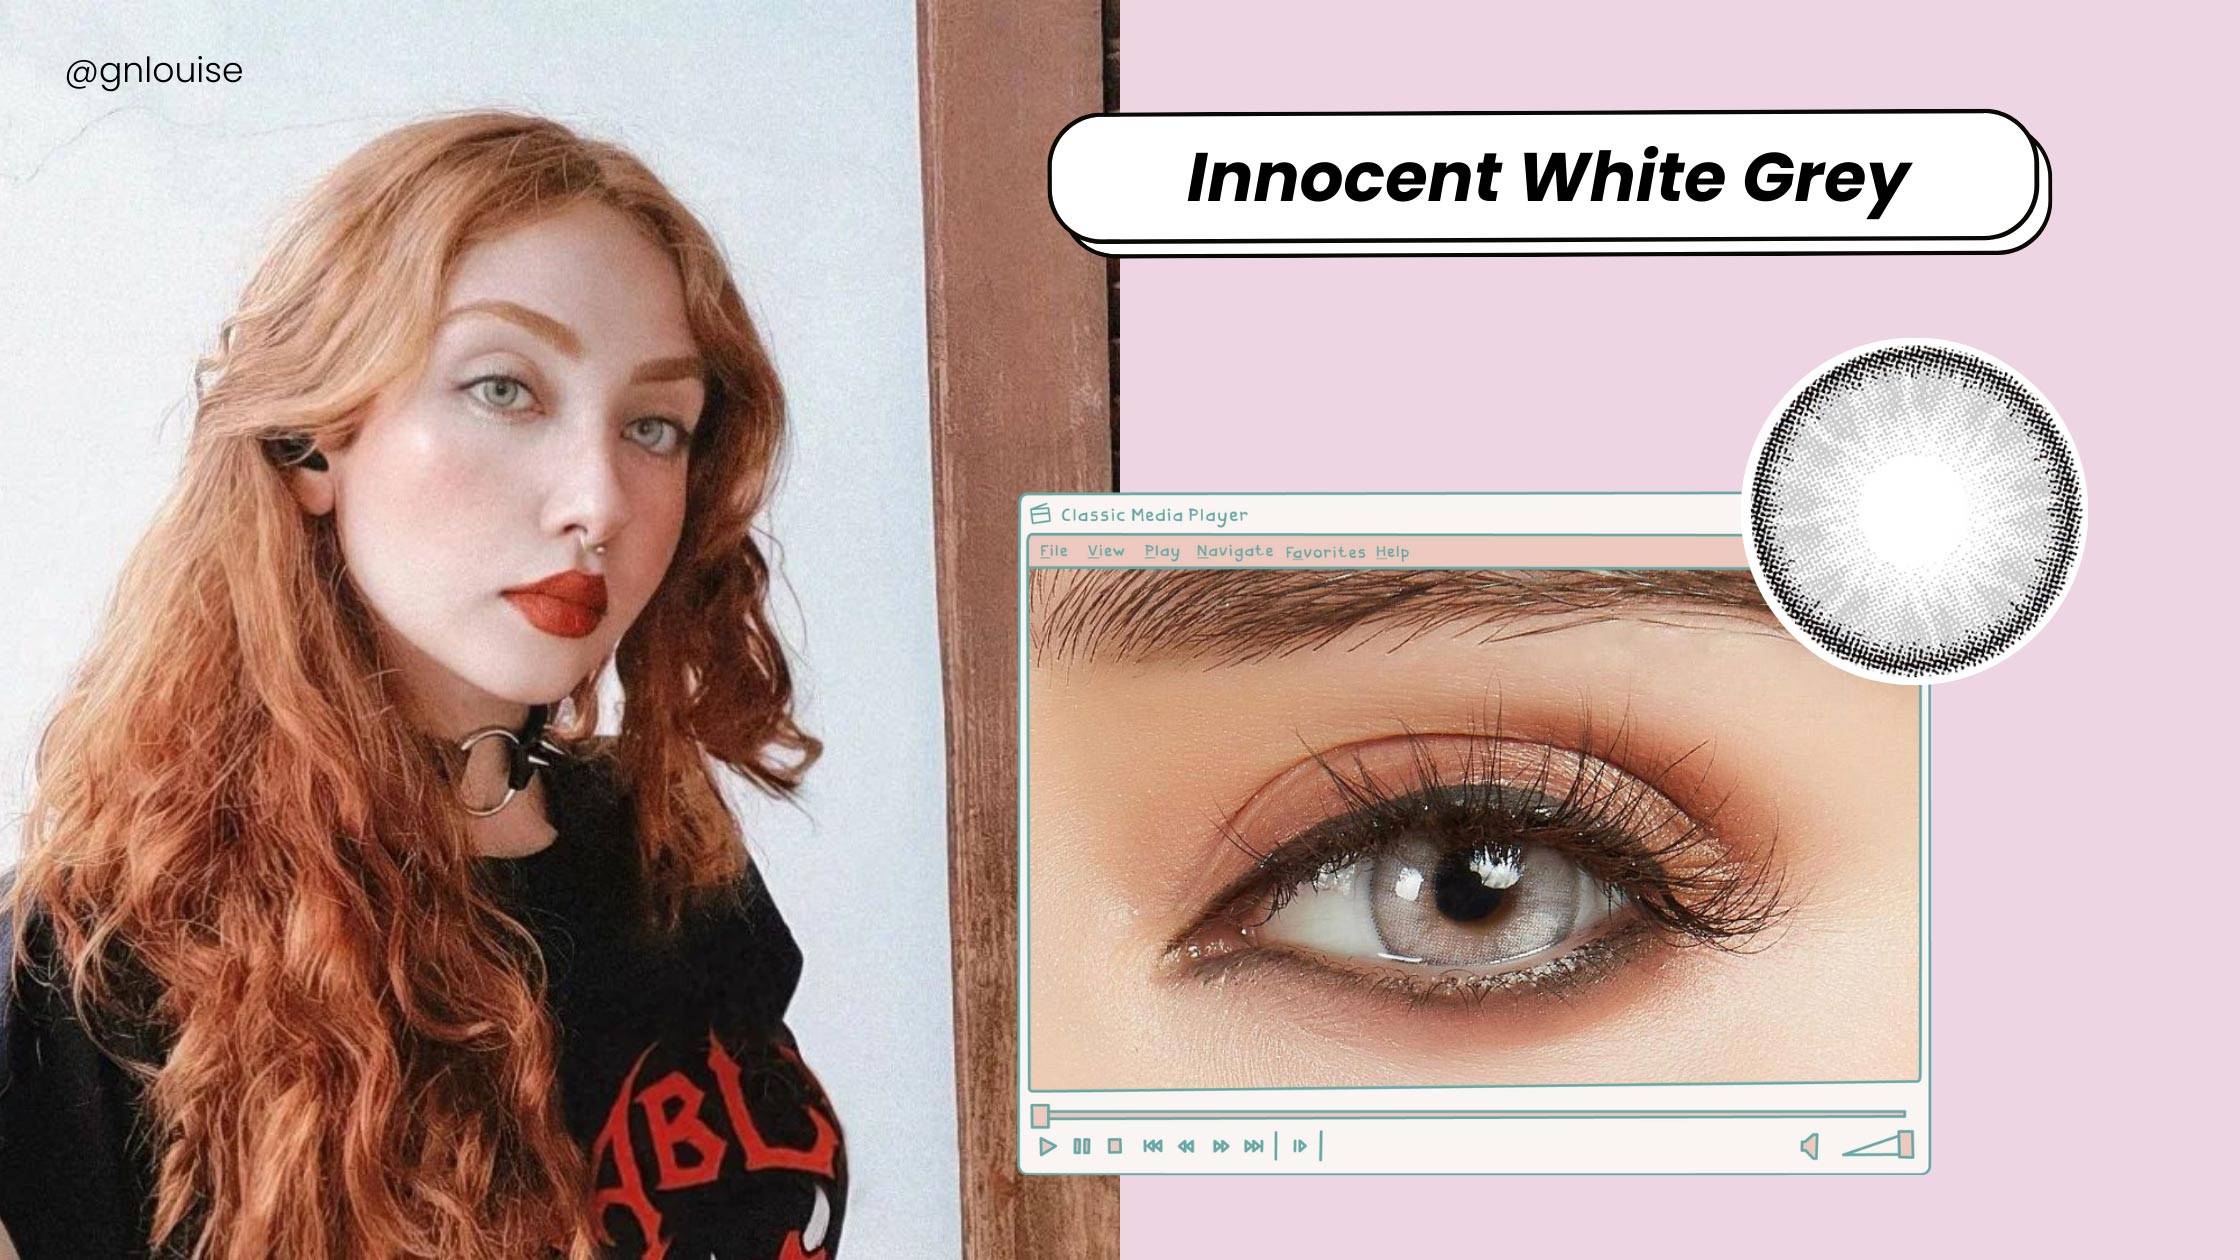 Light complexion model - Innocent white grey  Contacts